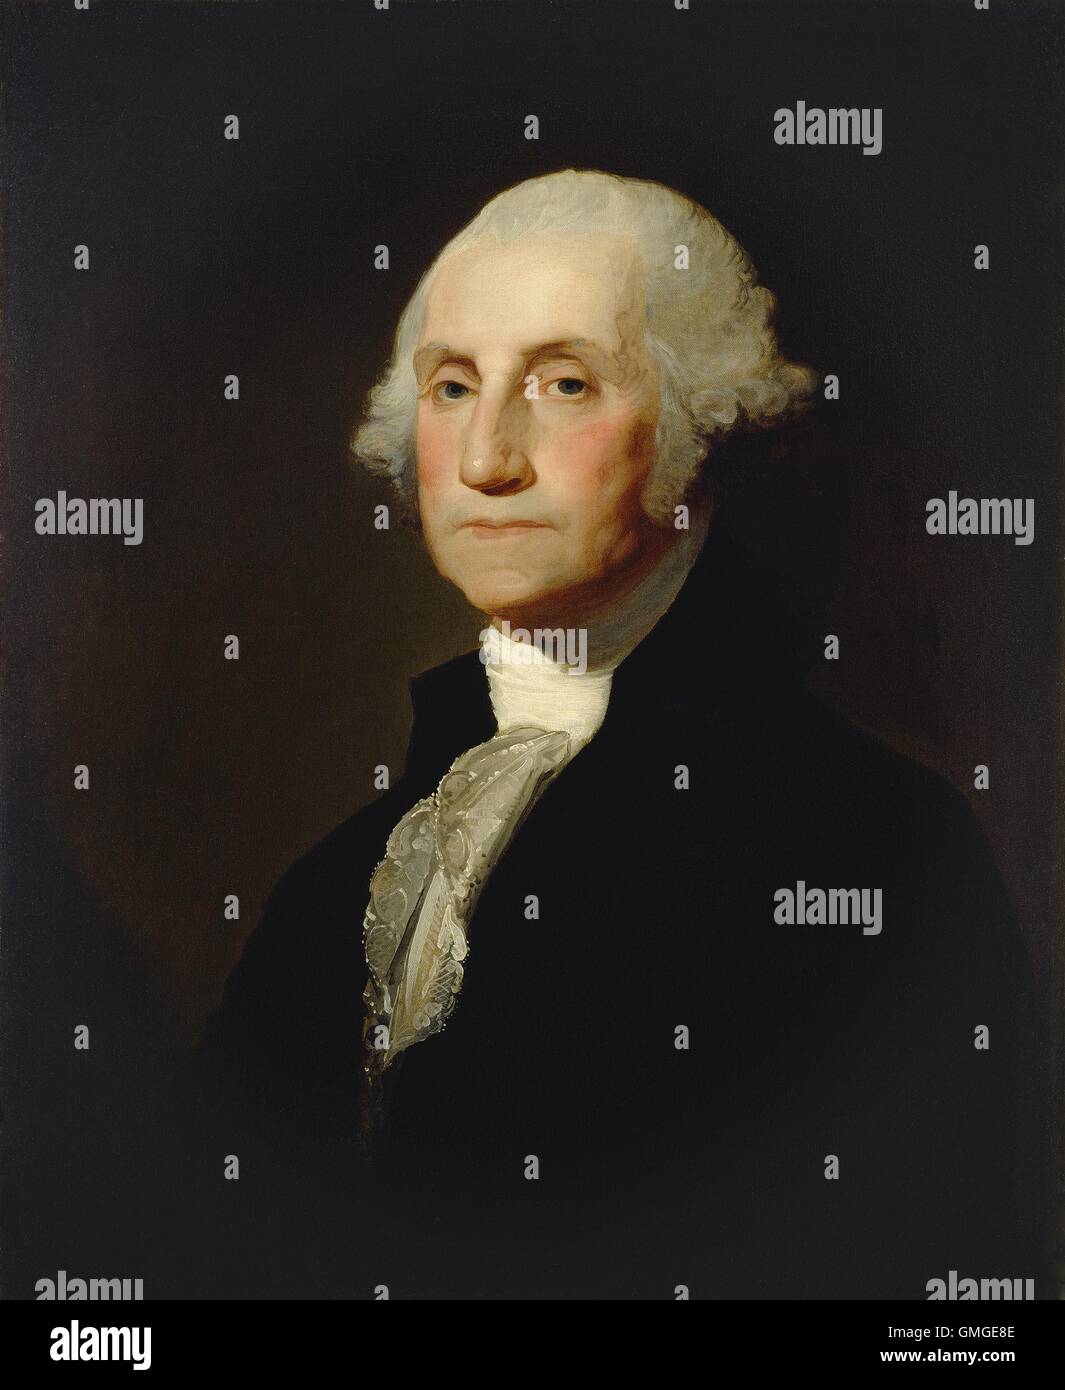 George Washington, by Gilbert Stuart, c. 1803-05, American painting, oil on canvas. In 1796 Washington sat for Stuart who created the famous, but never finished 'Athenaeum' portrait. From that work, he sold up to 70 of his reproductions, such as this one, (BSLOC_2016_5_62) Stock Photo